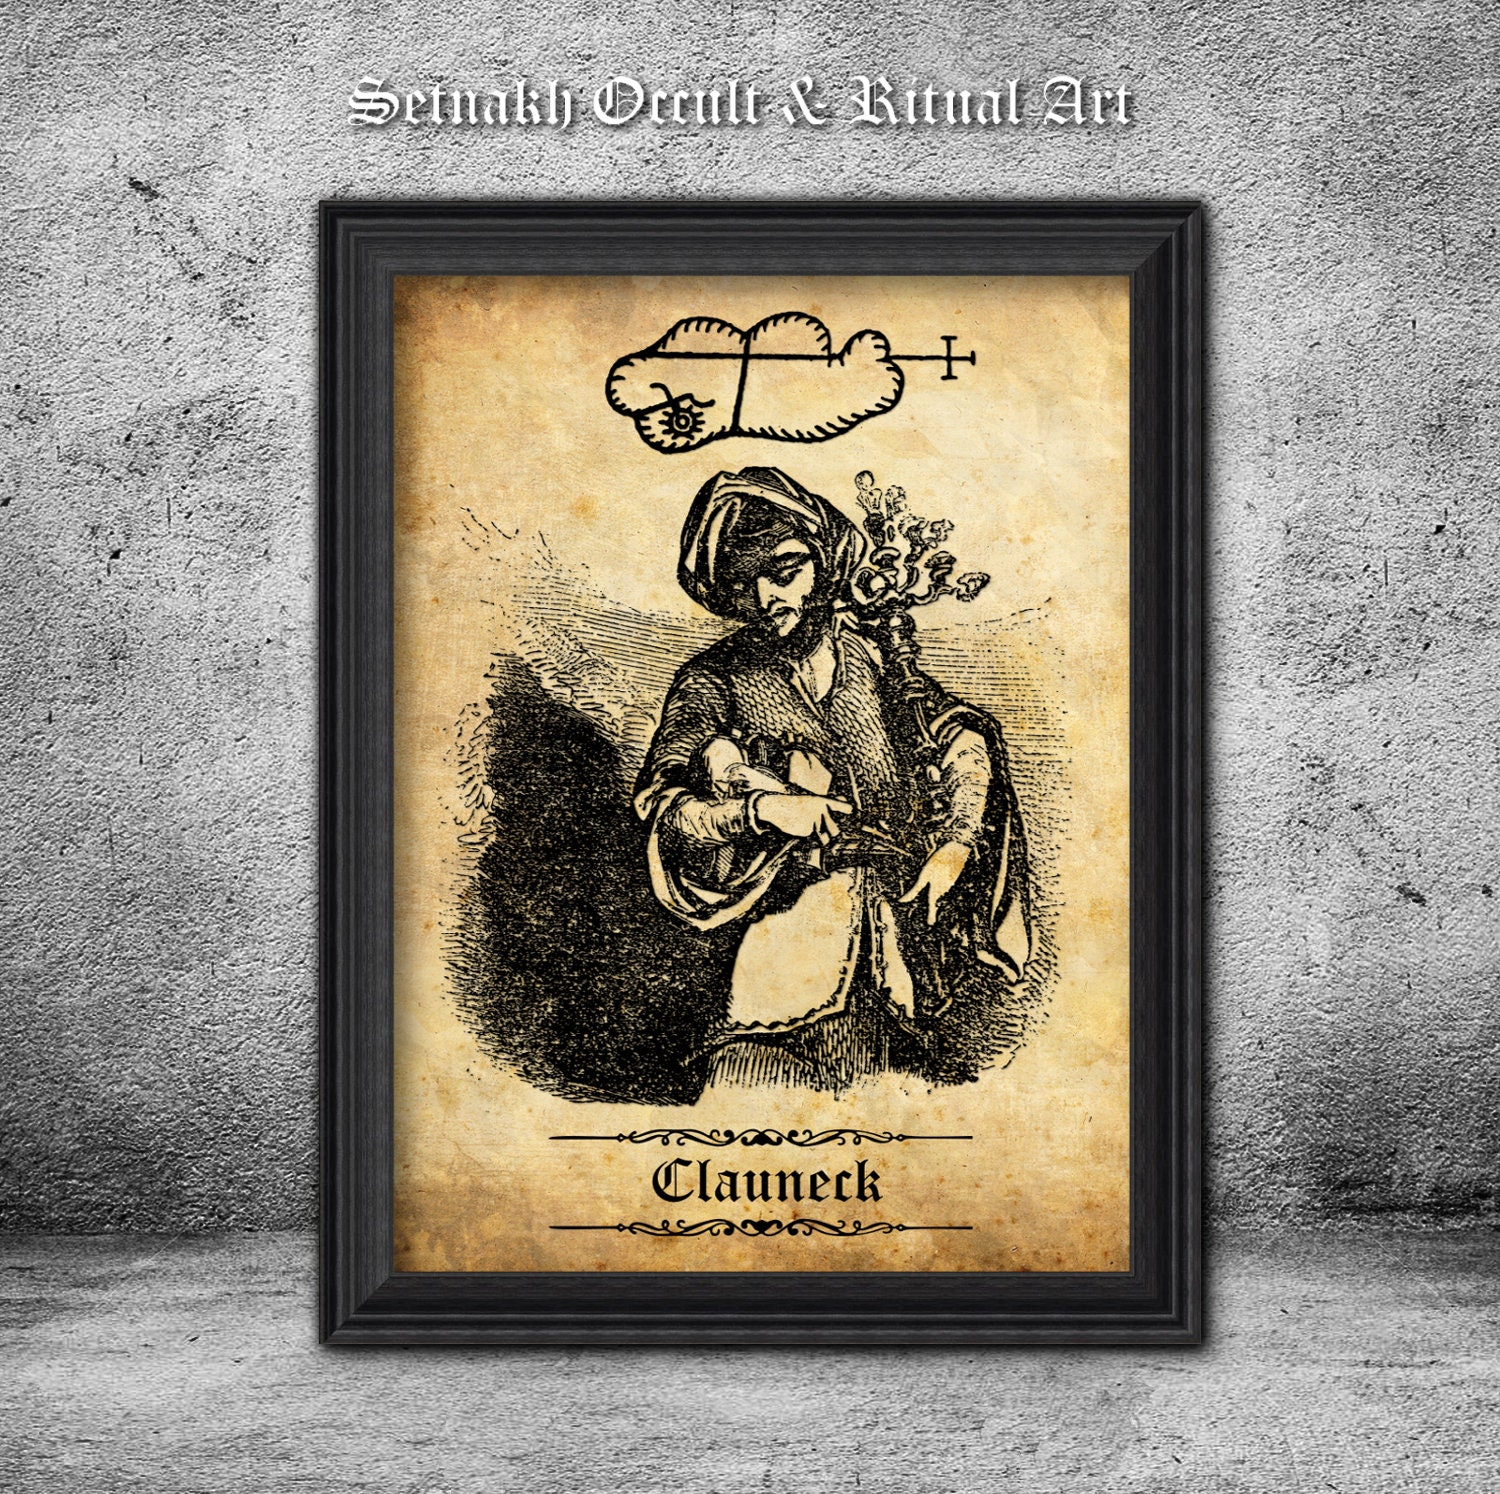 CLEARANCE SALE NHL Hockey Game of Thrones Inspired Medieval Fantasy Sigil  Poster 24x36